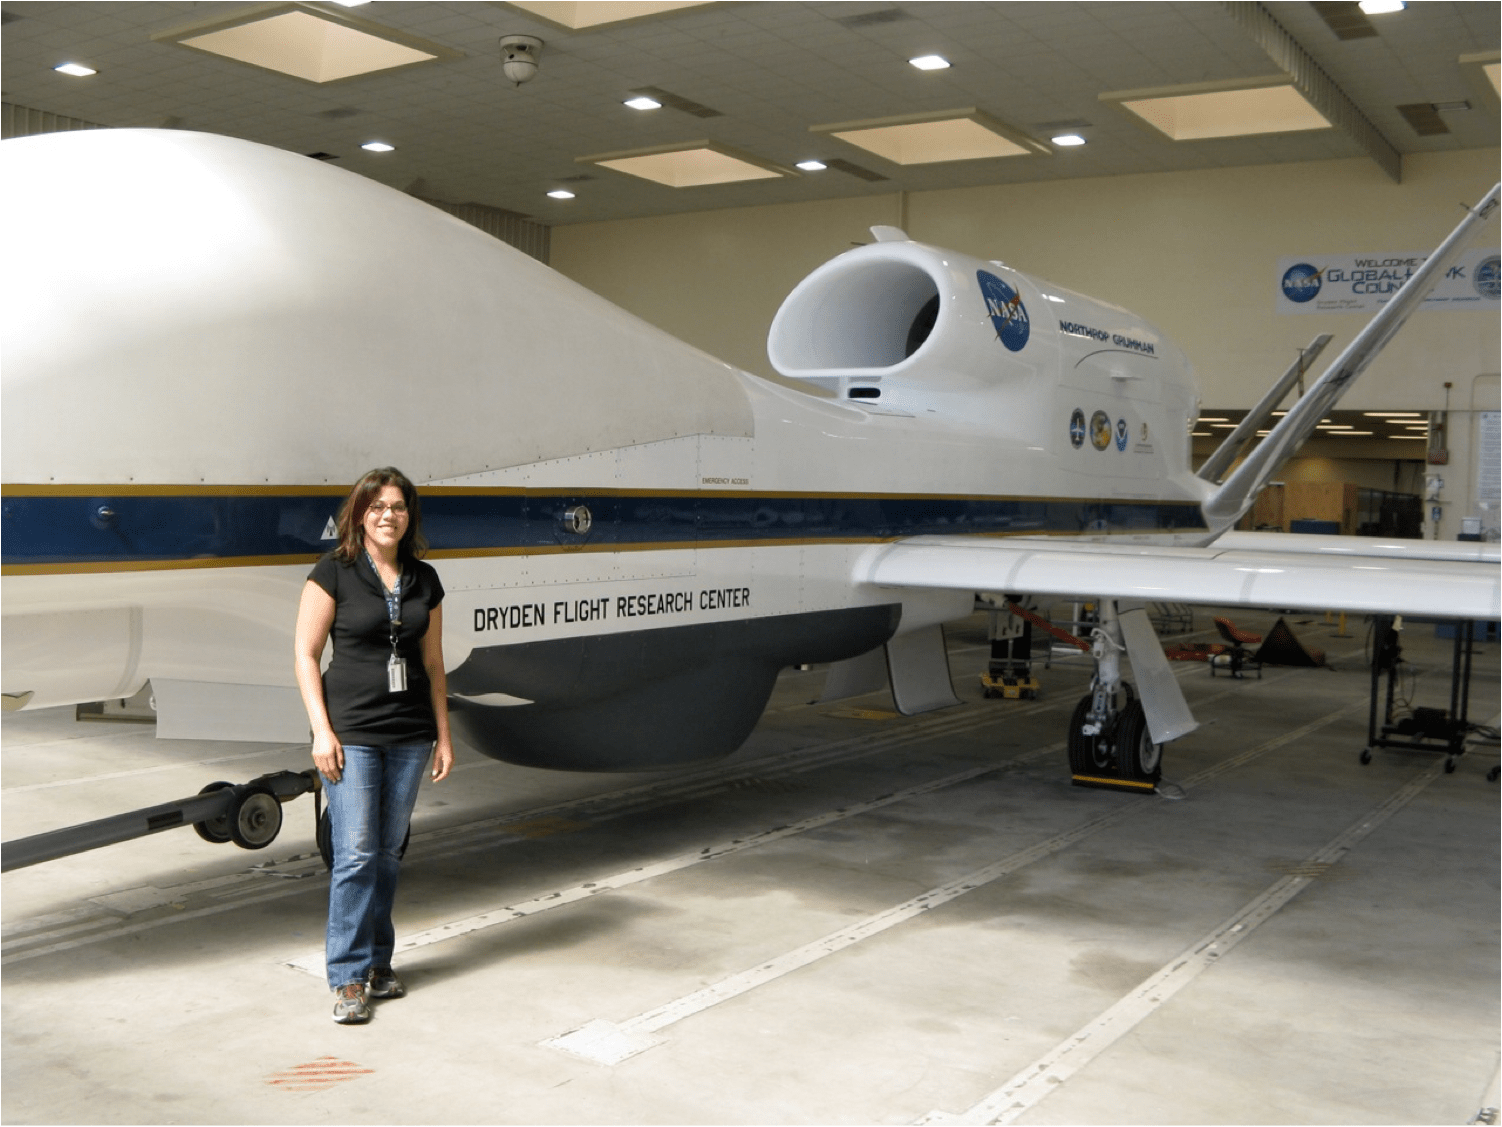 Amber standing in front of the Northrop Grumman RQ-4 Global Hawk unmanned aircraft.